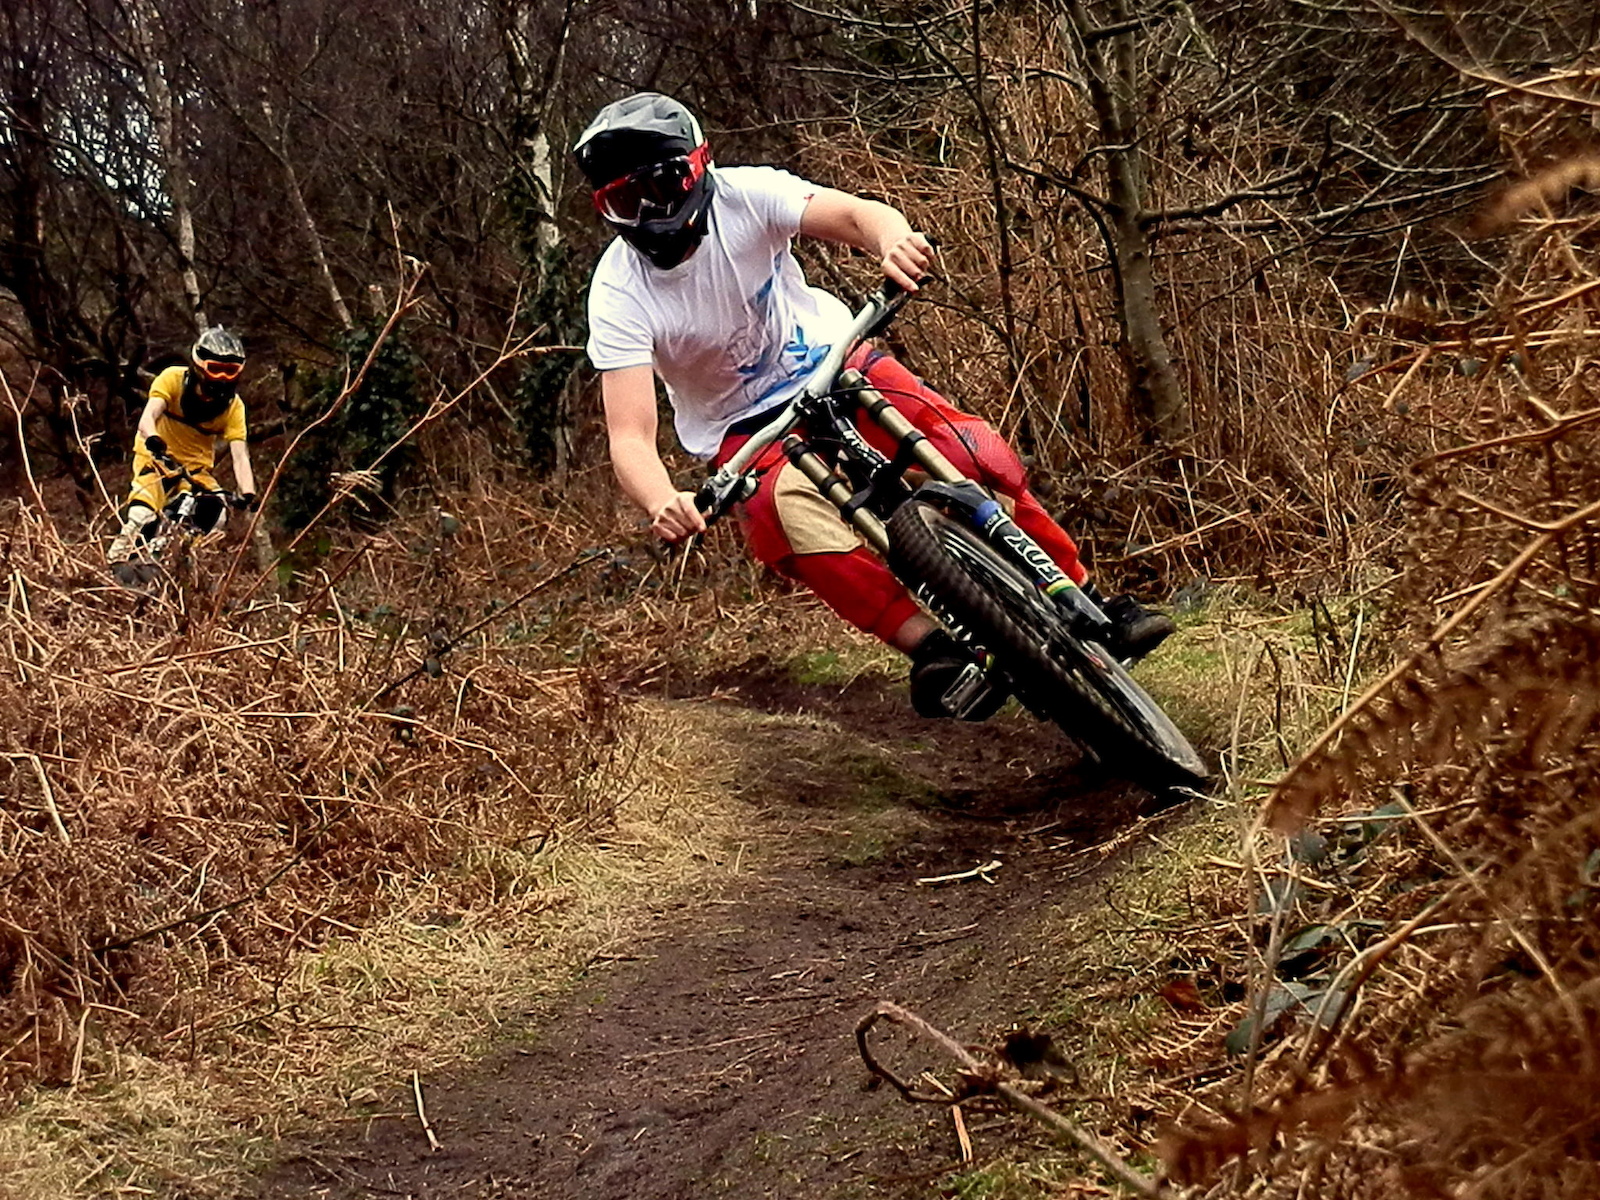 hitting the berms